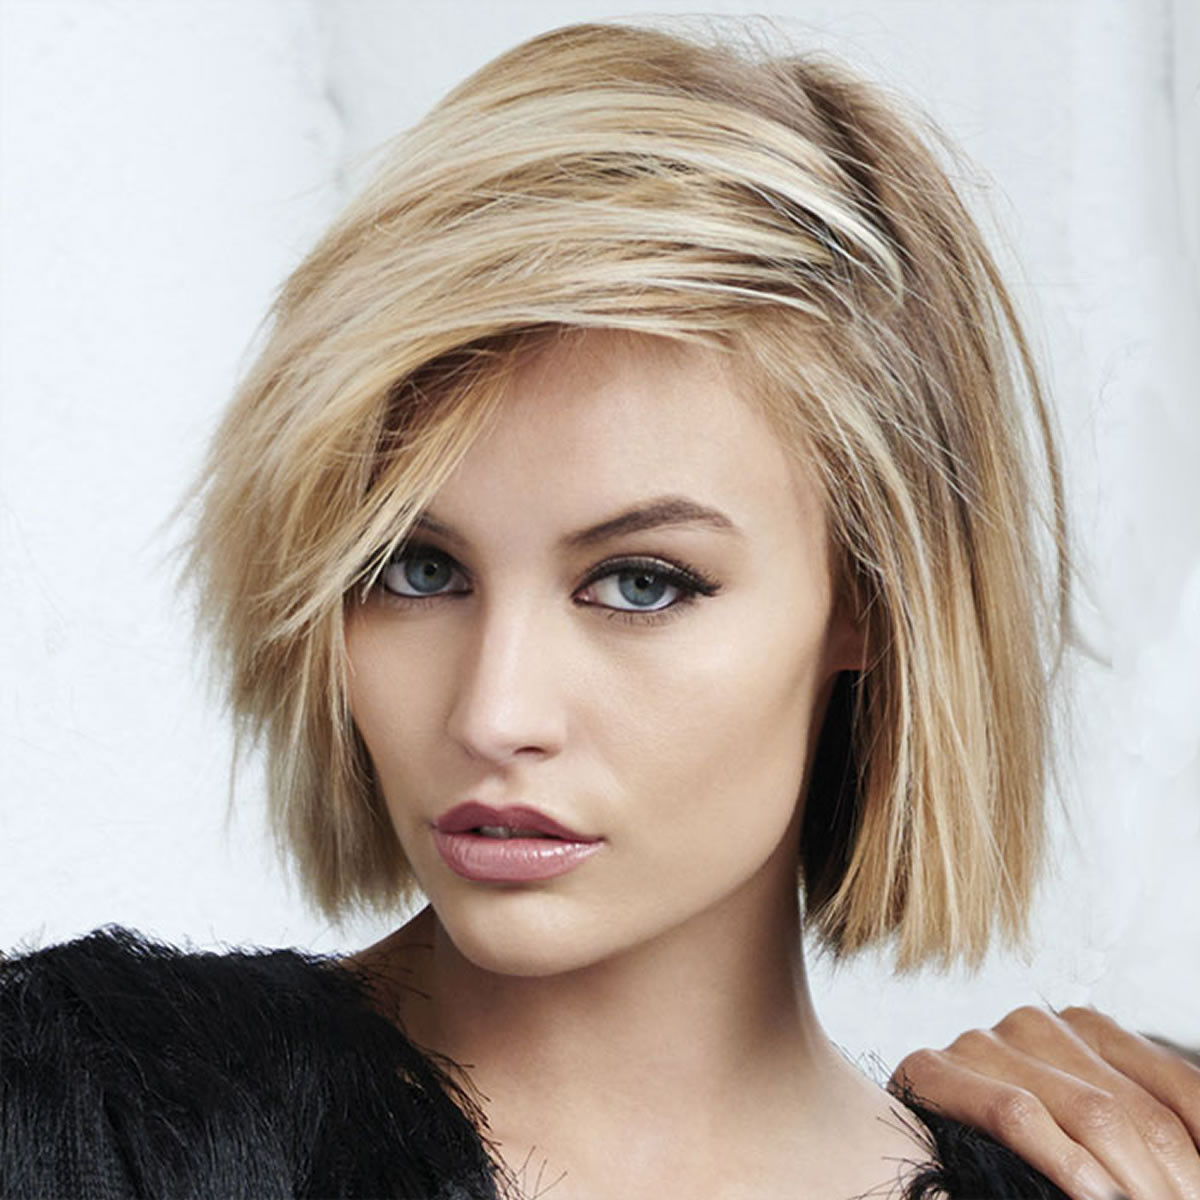 Hairstyles For Bob Haircuts
 The Best 33 Short Bob Haircuts – 2019 Short Hairstyles for